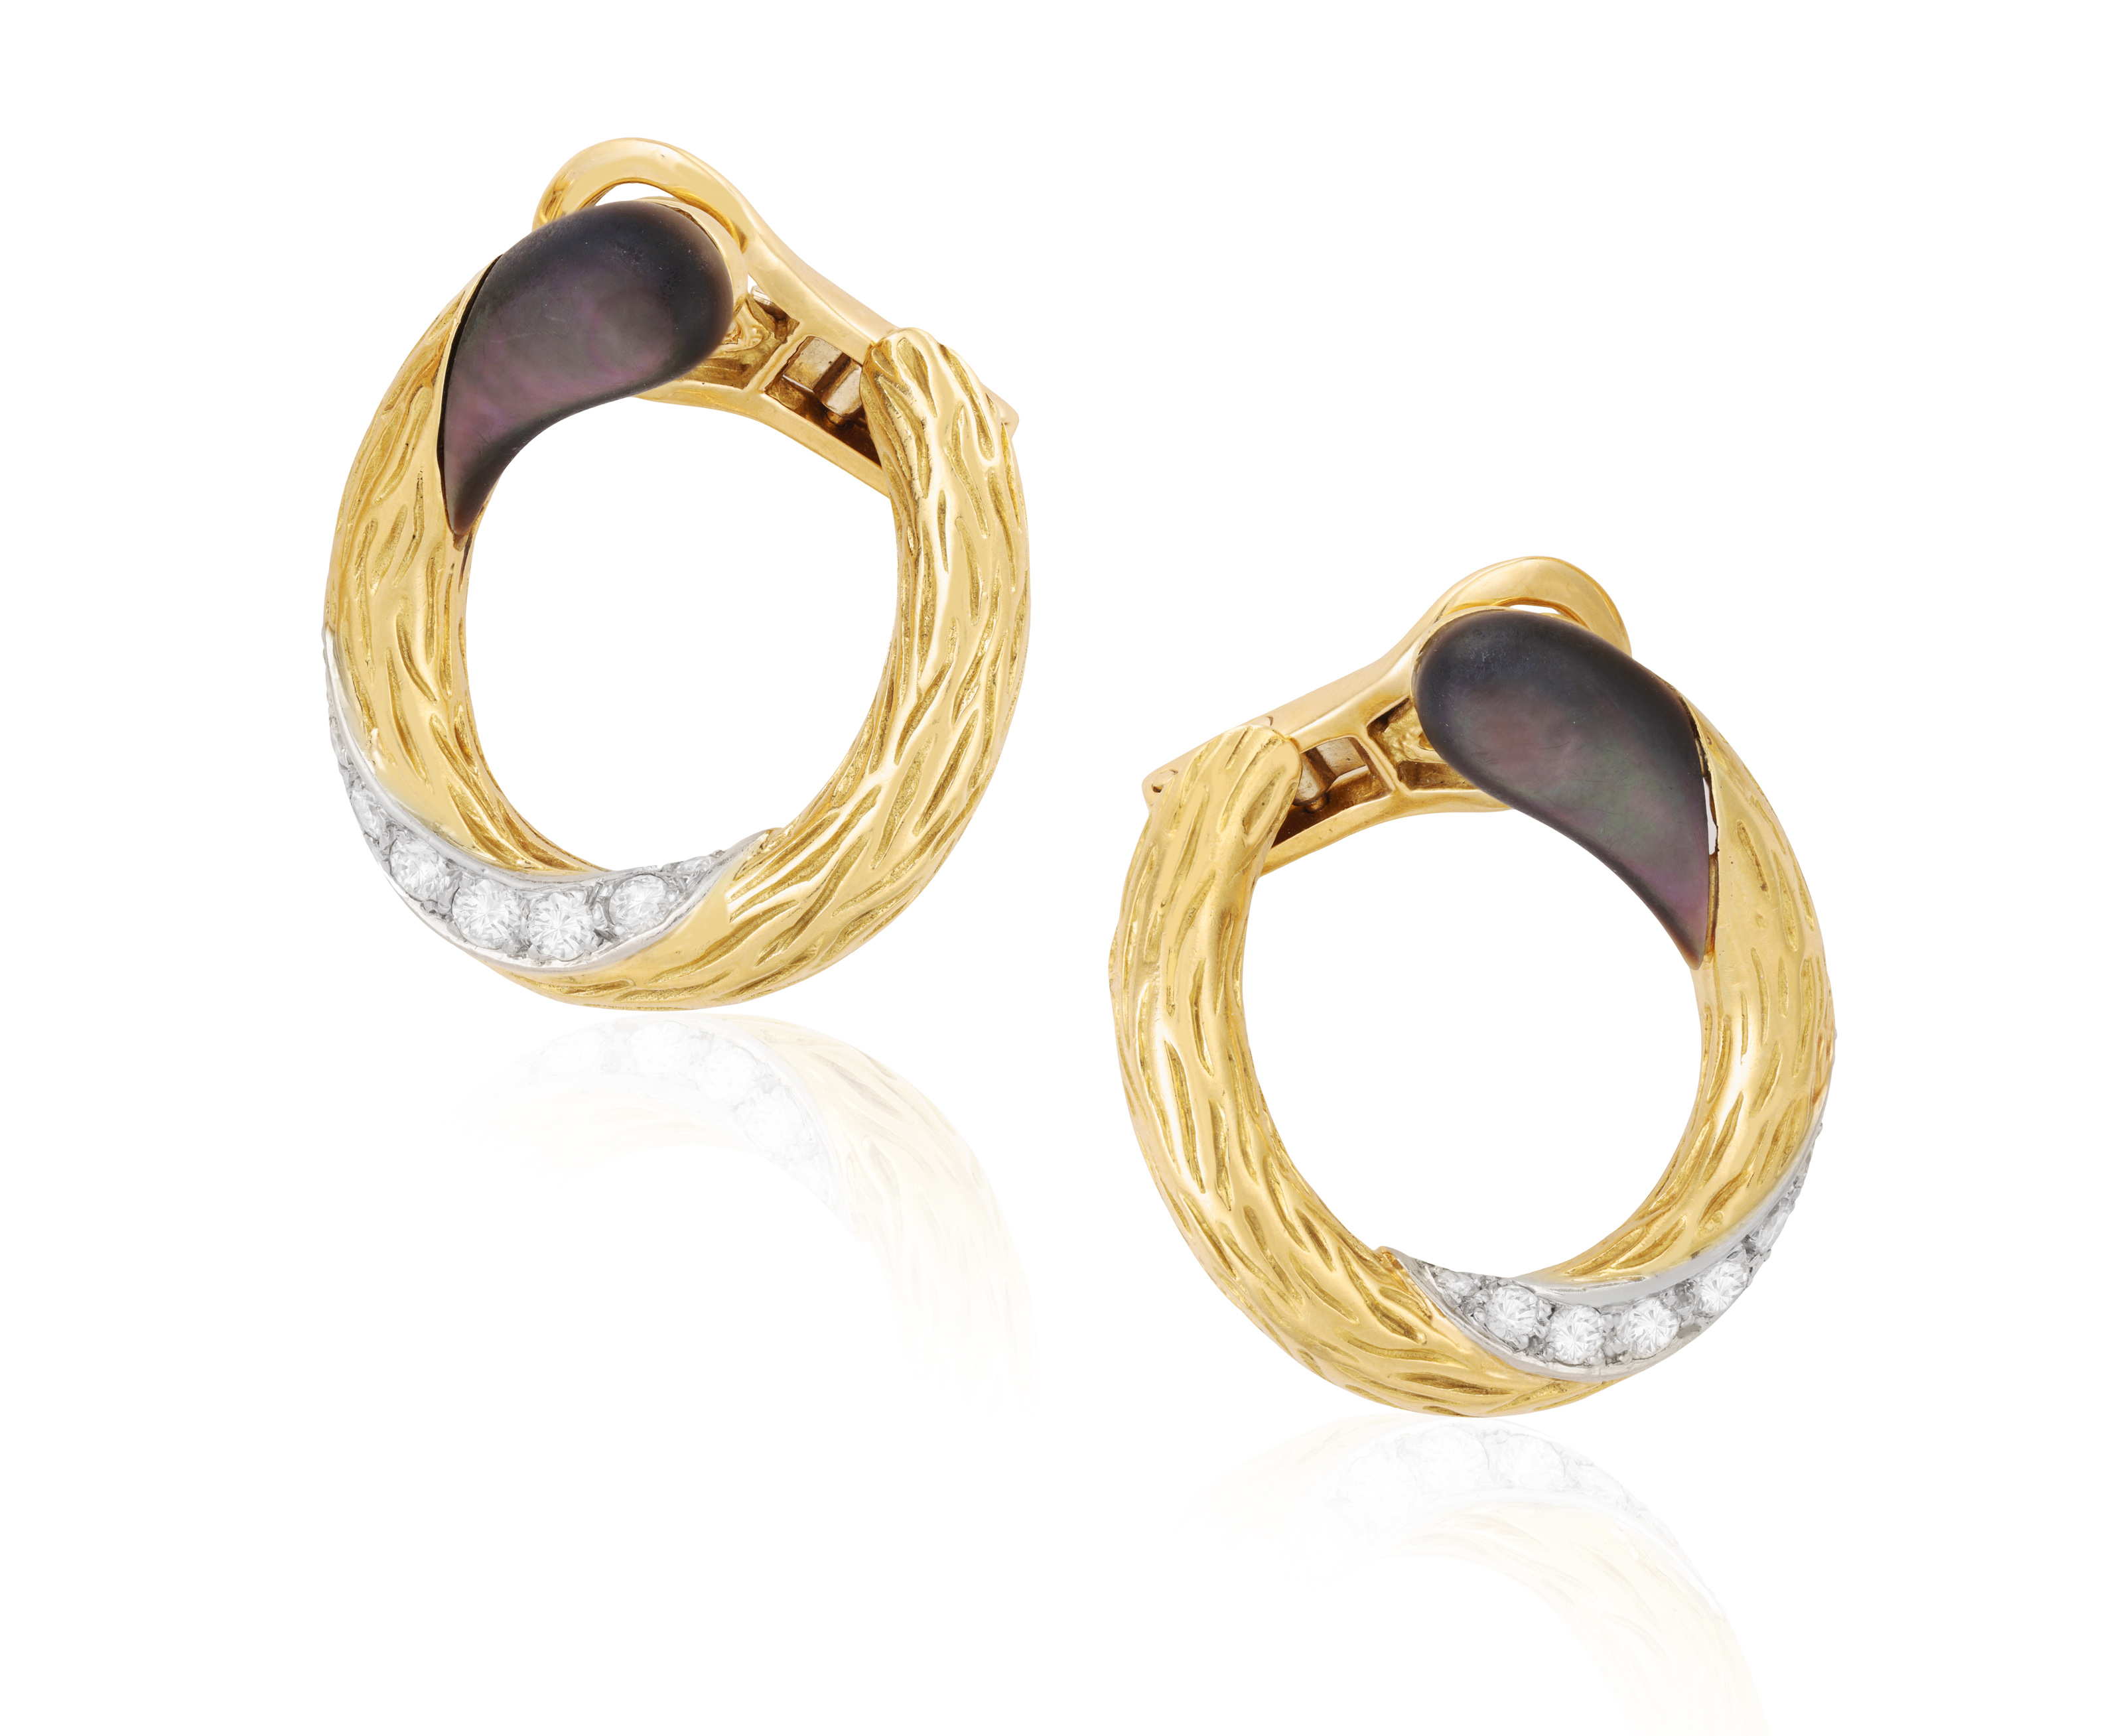 A PAIR OF DIAMOND AND MOTHER-OF-PEARL DIAMOND EARRINGS, BY MAUBOUSSIN, CIRCA 1970 Each textured gold